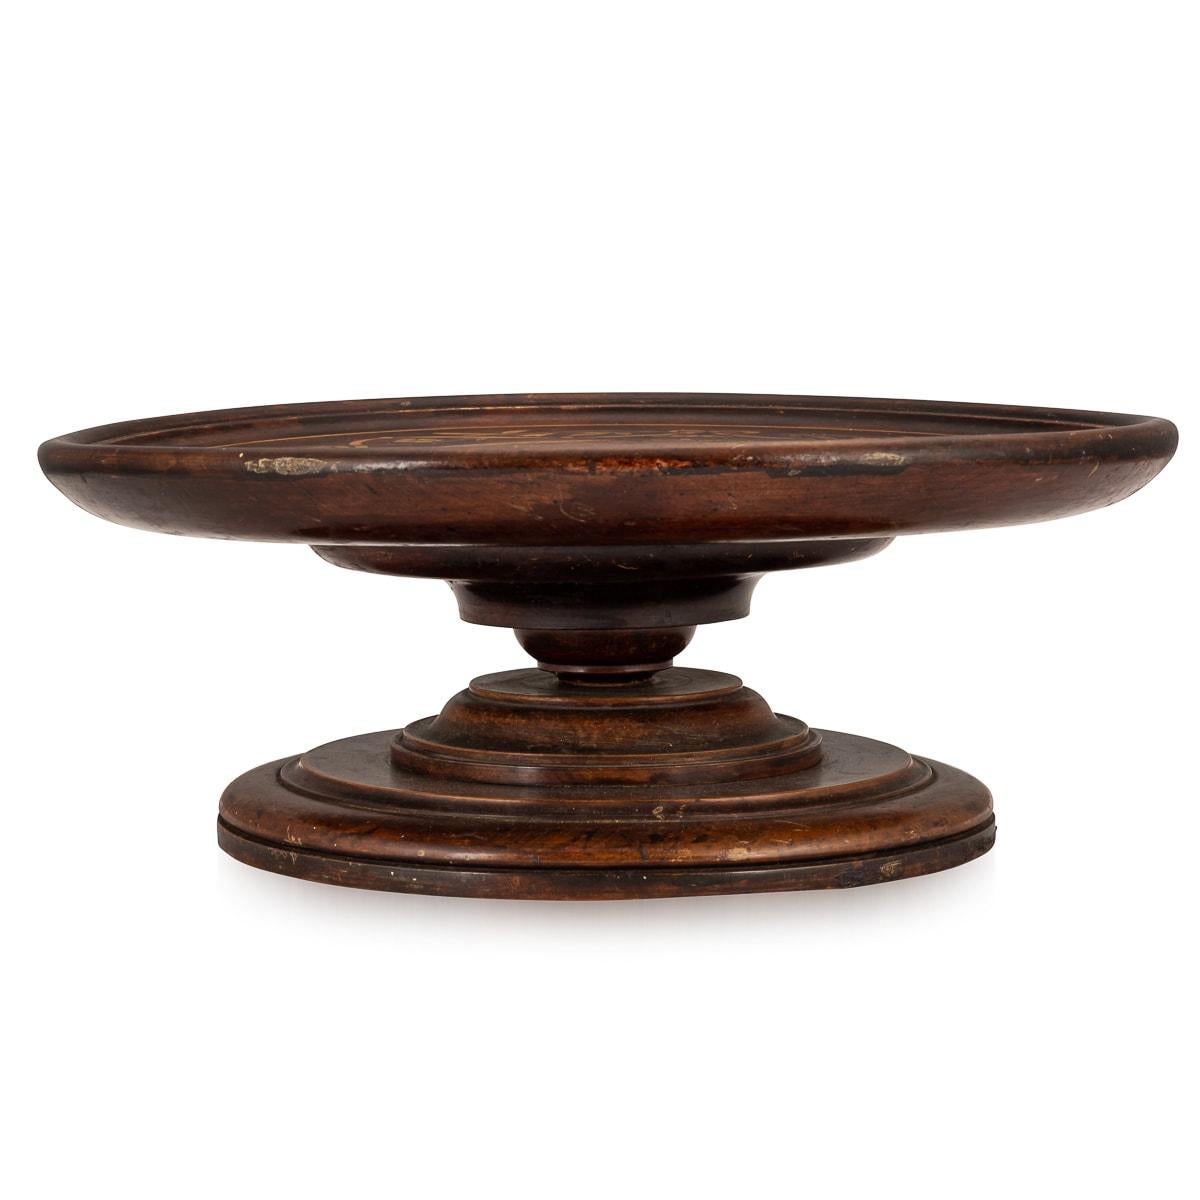 A lovely oak and mahogany inlaid Lazy Susan, made in England around the 1930s. A Lazy Susan is a round tray that rotates and is designed to sit on a countertop or table and allow multiple diners to access food, condiments and relishes without having